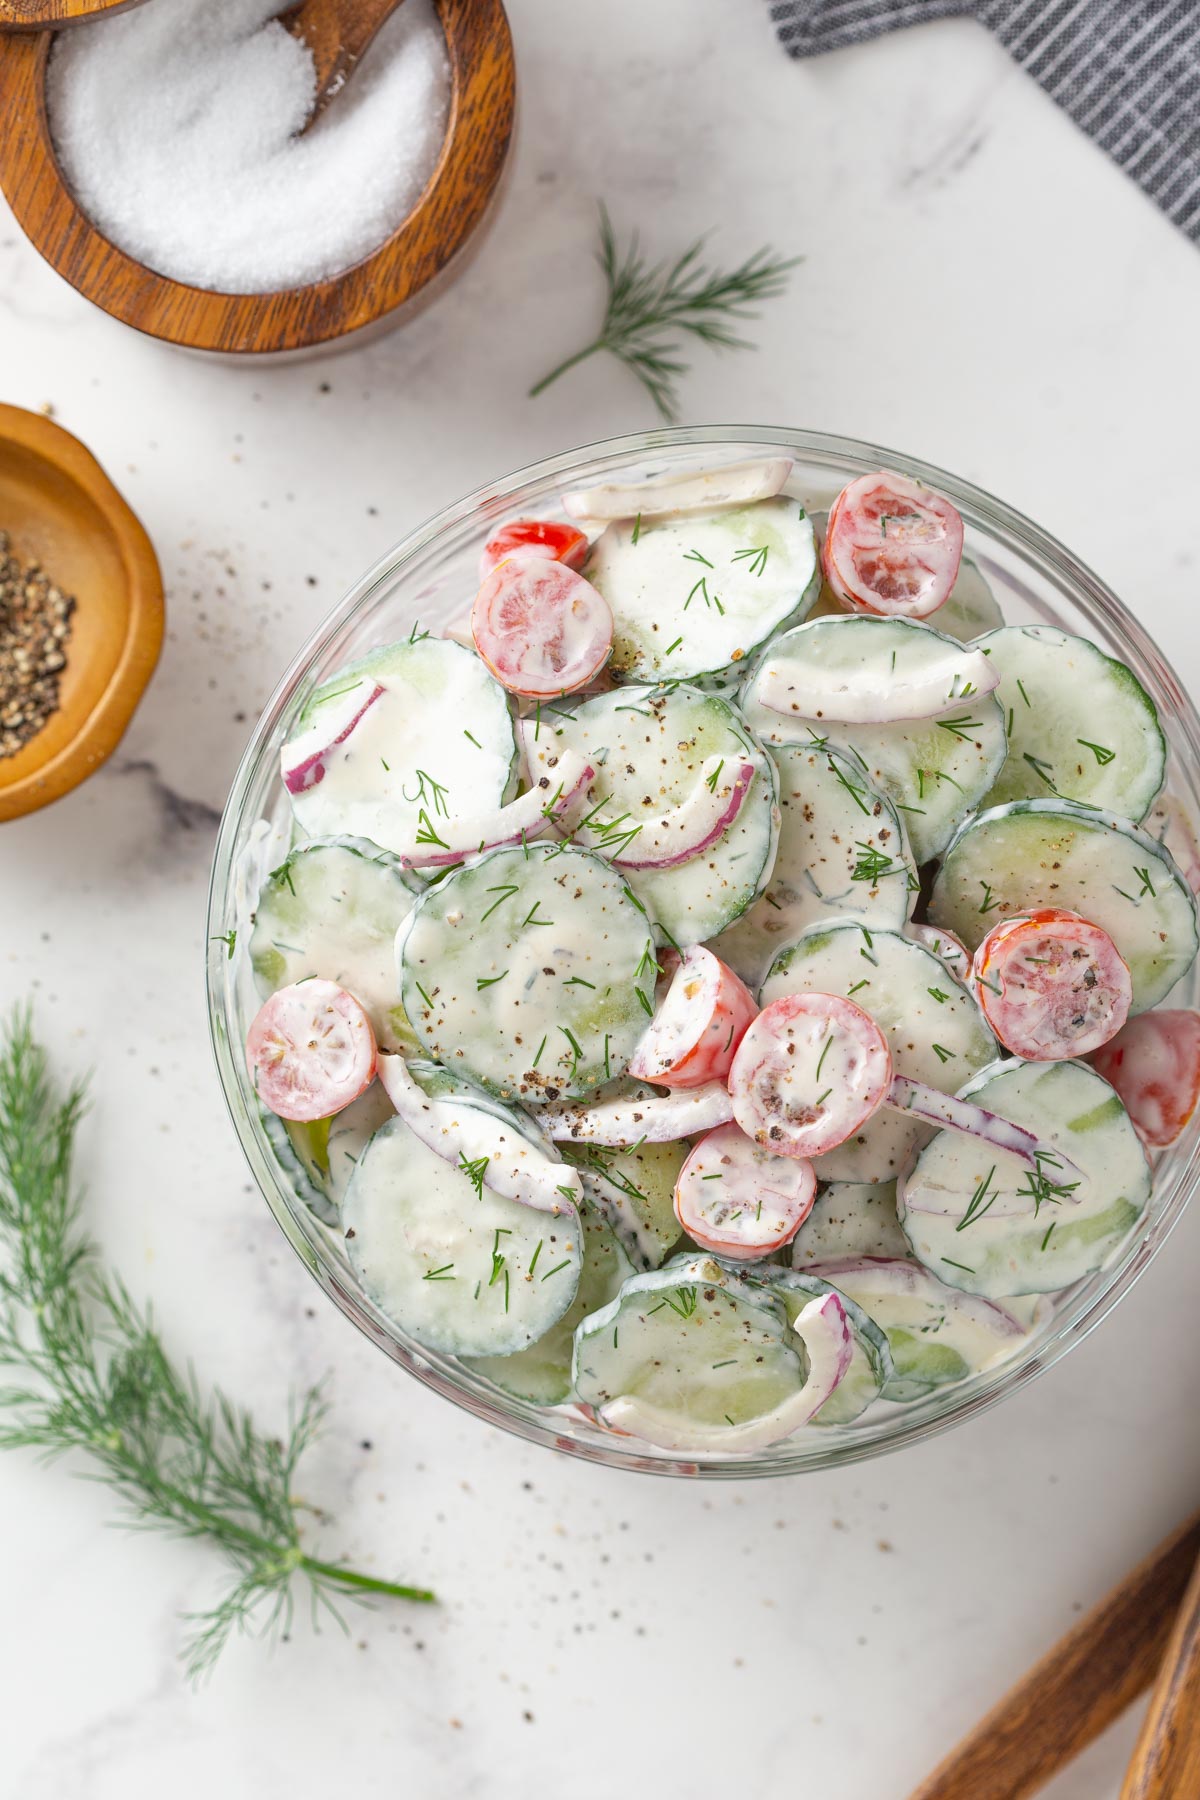 Overhead view of creamy cucumber and tomato salad in a glass bowl.